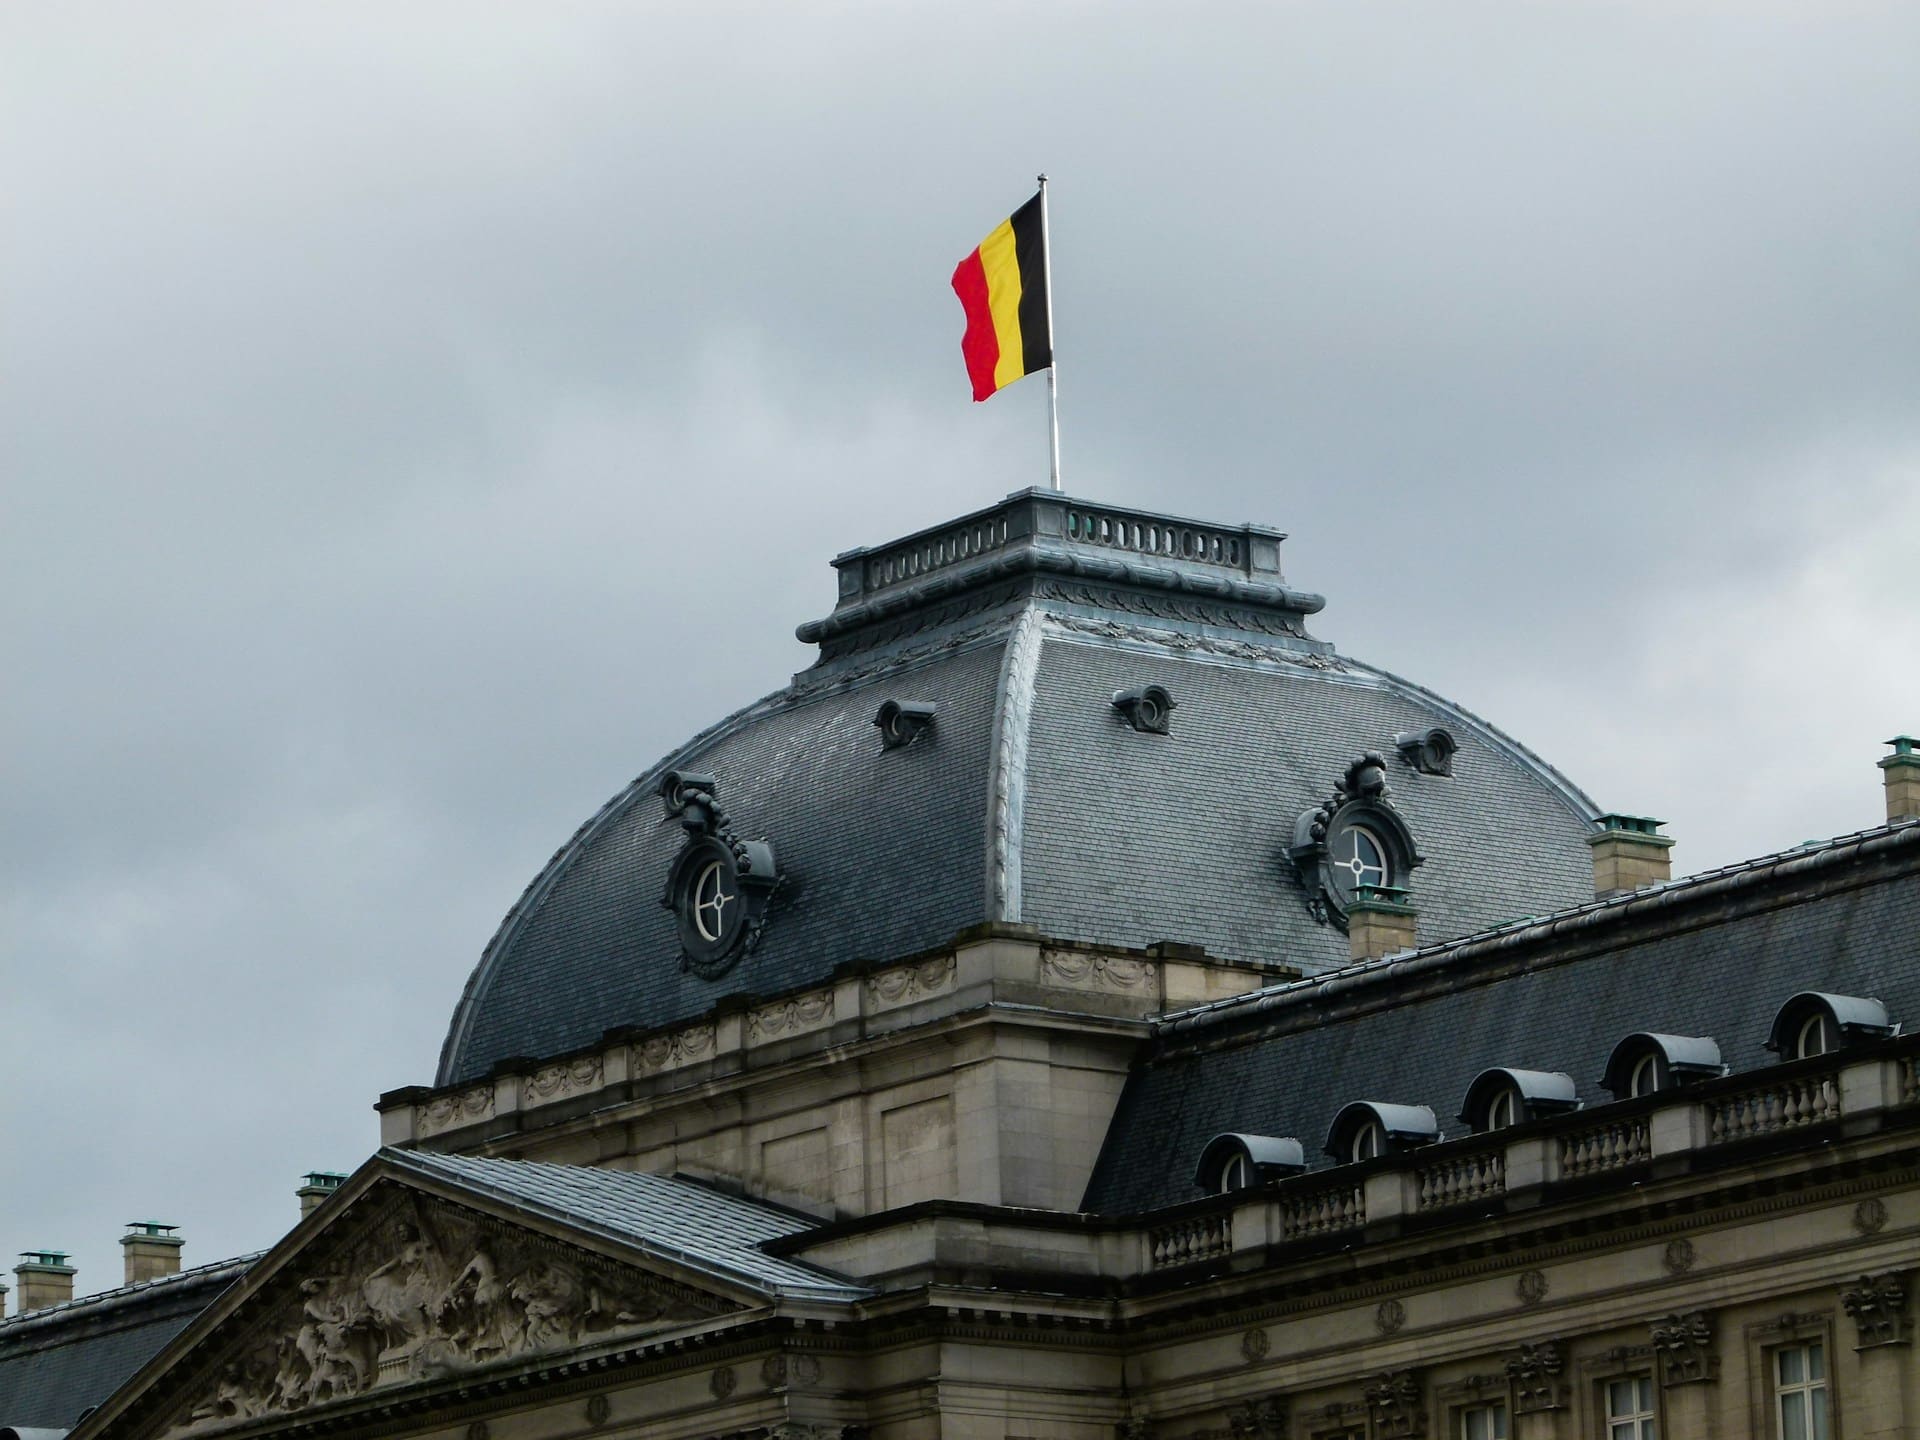 Frequently Asked Questions When Traveling to Belgium